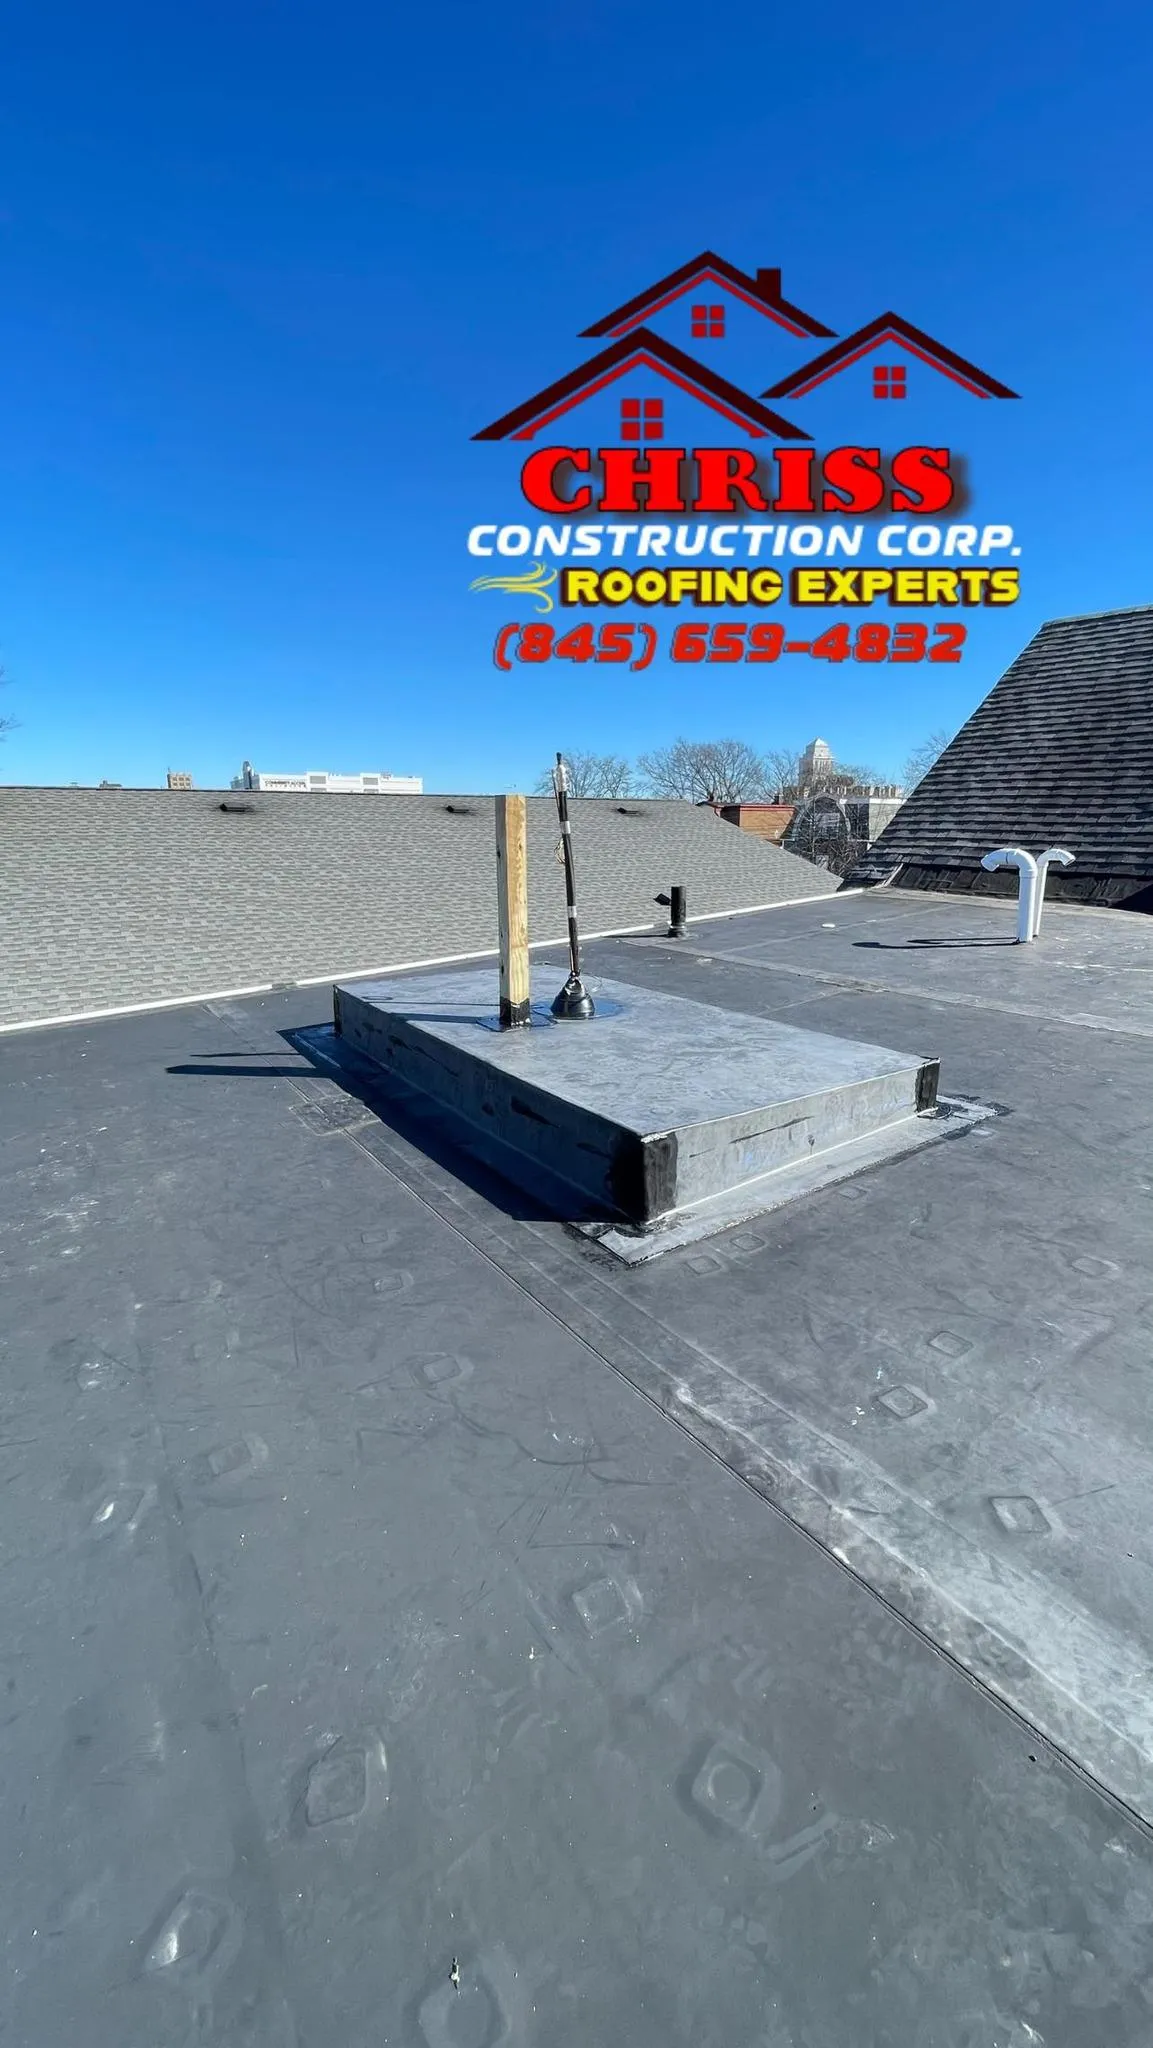 Carpentry for CHRISS CONSTRUCTION CORP. in Middletown, NY 